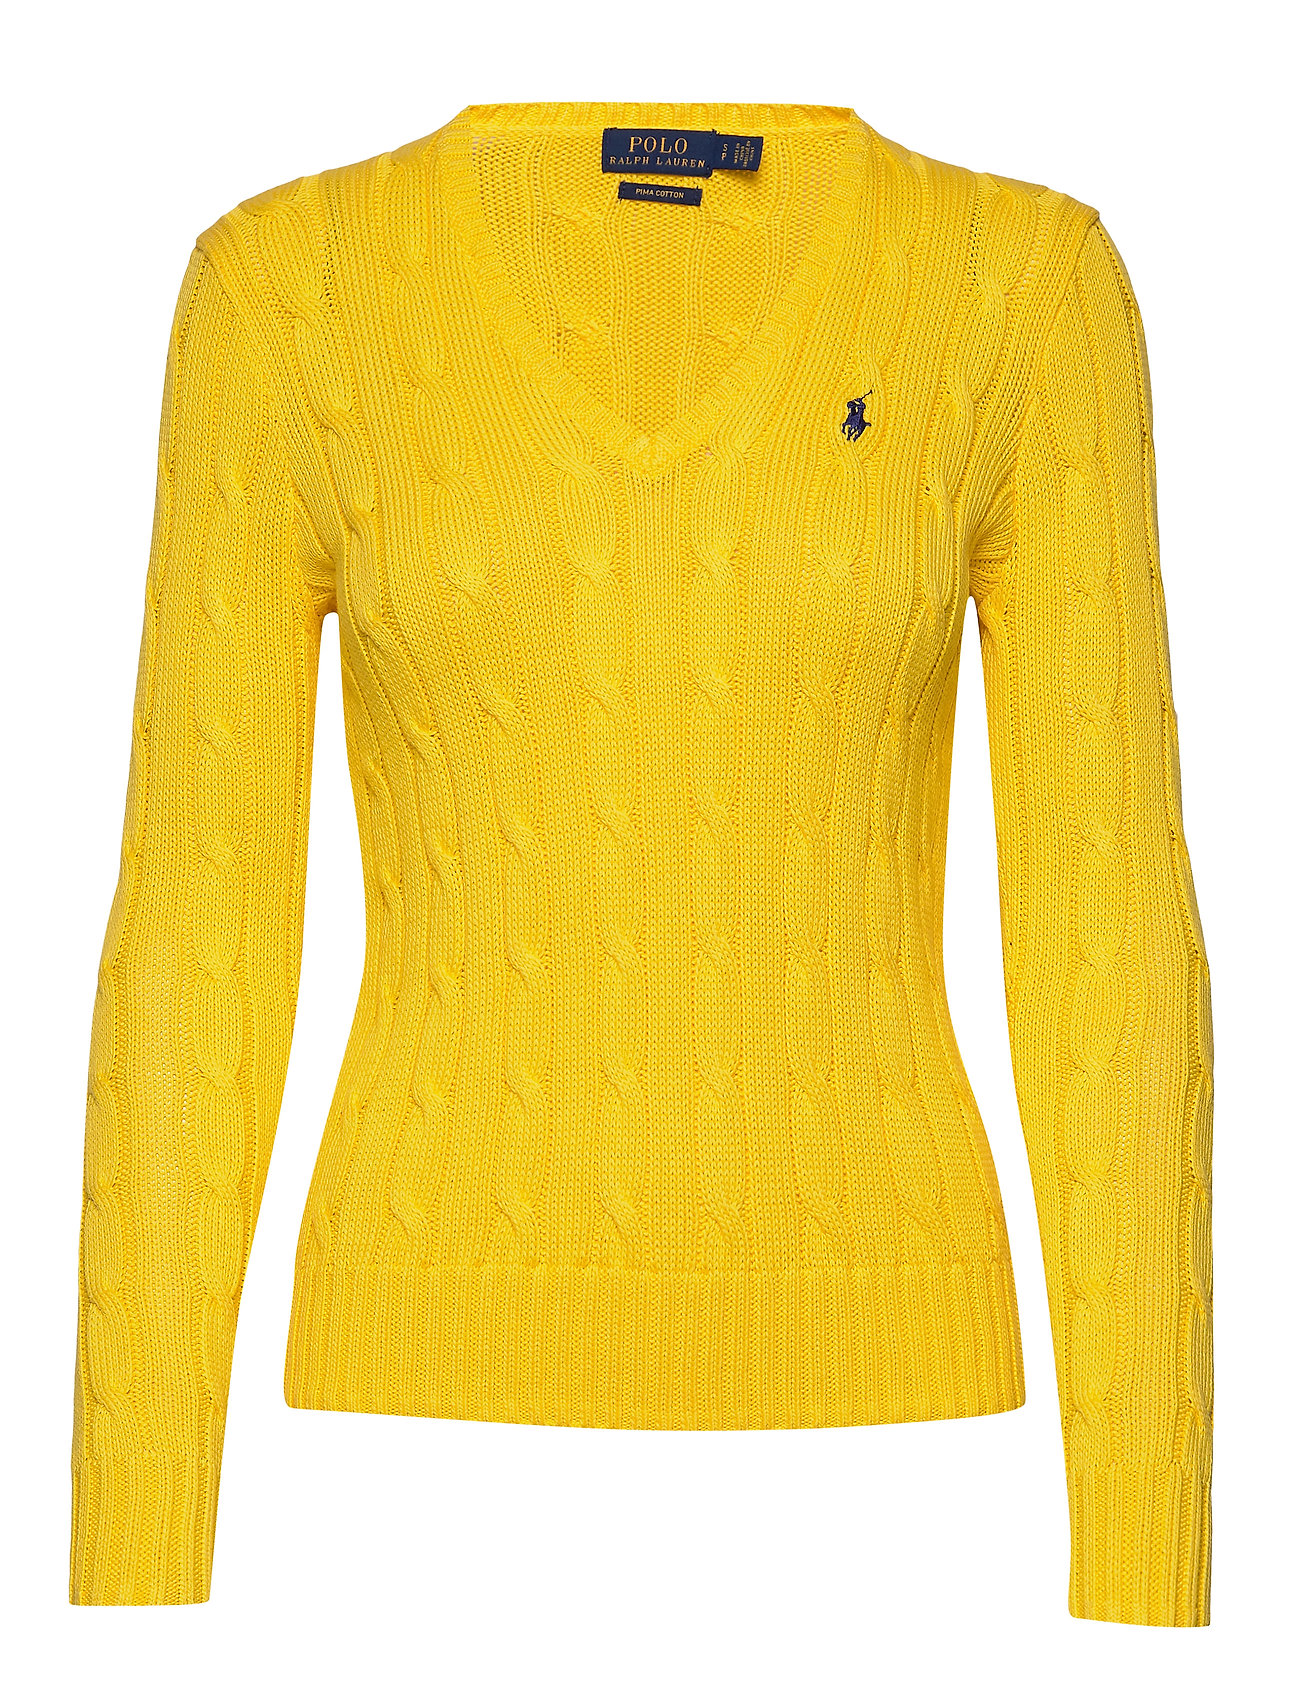 ralph lauren v neck cable knit sweater